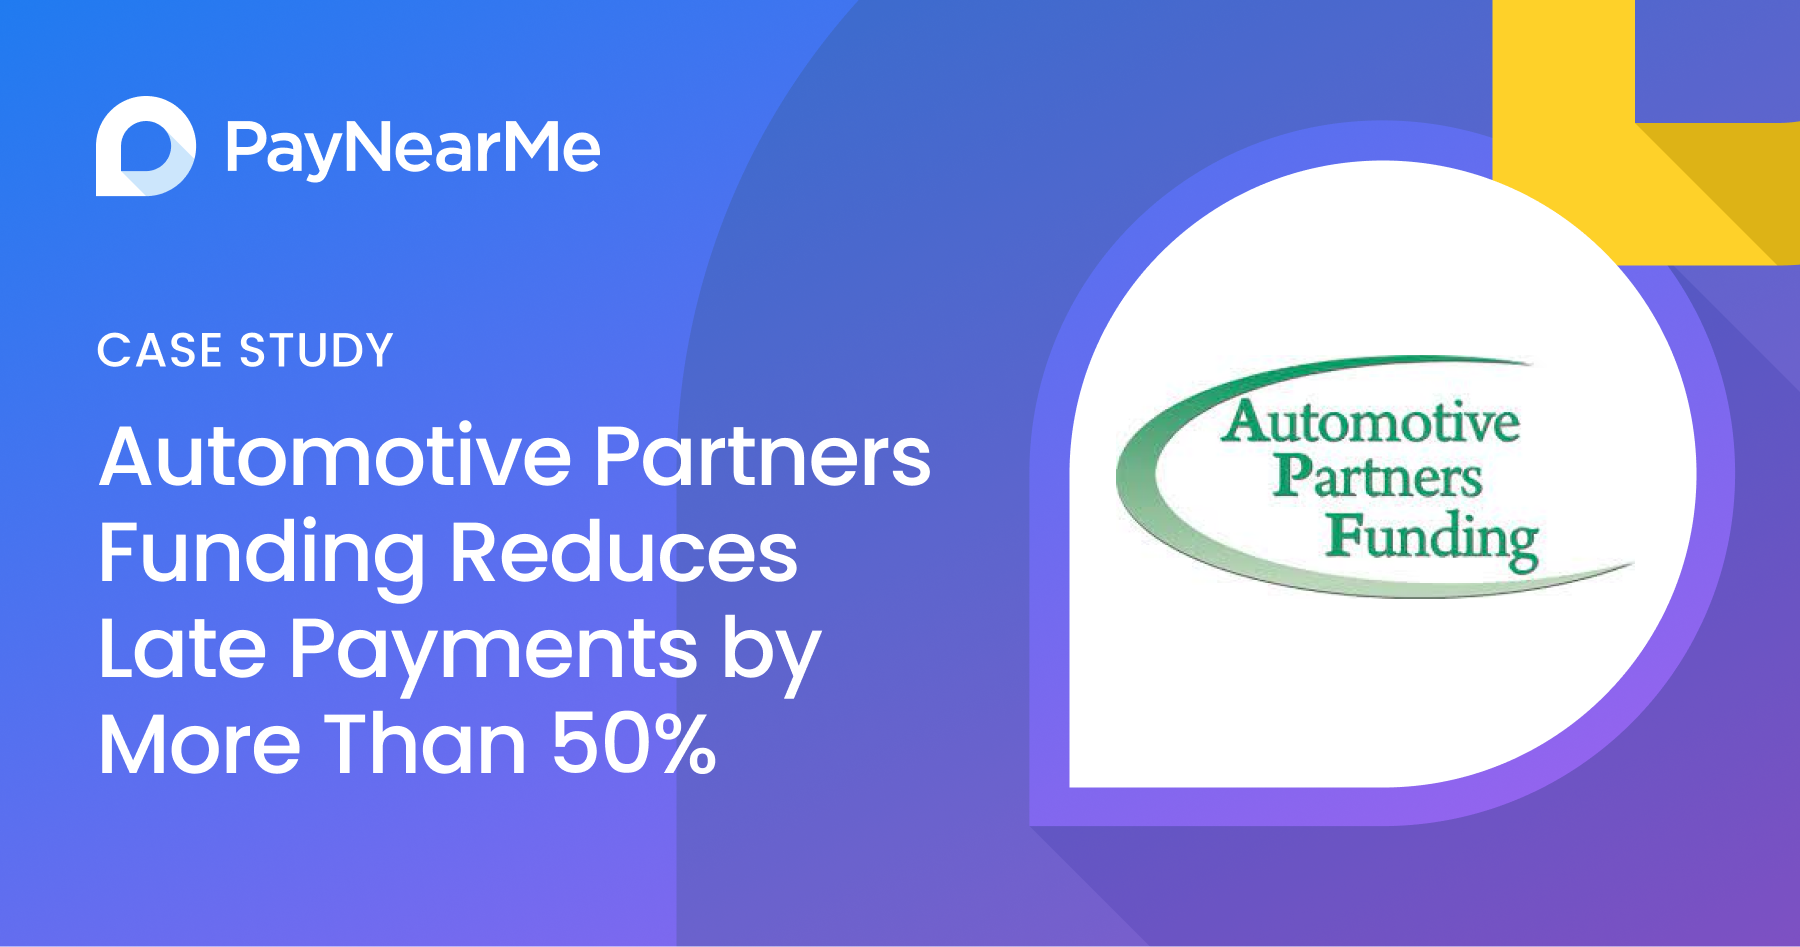 Case Study: Automotive Partners Funding Reduces Late Payments by More Than 50%